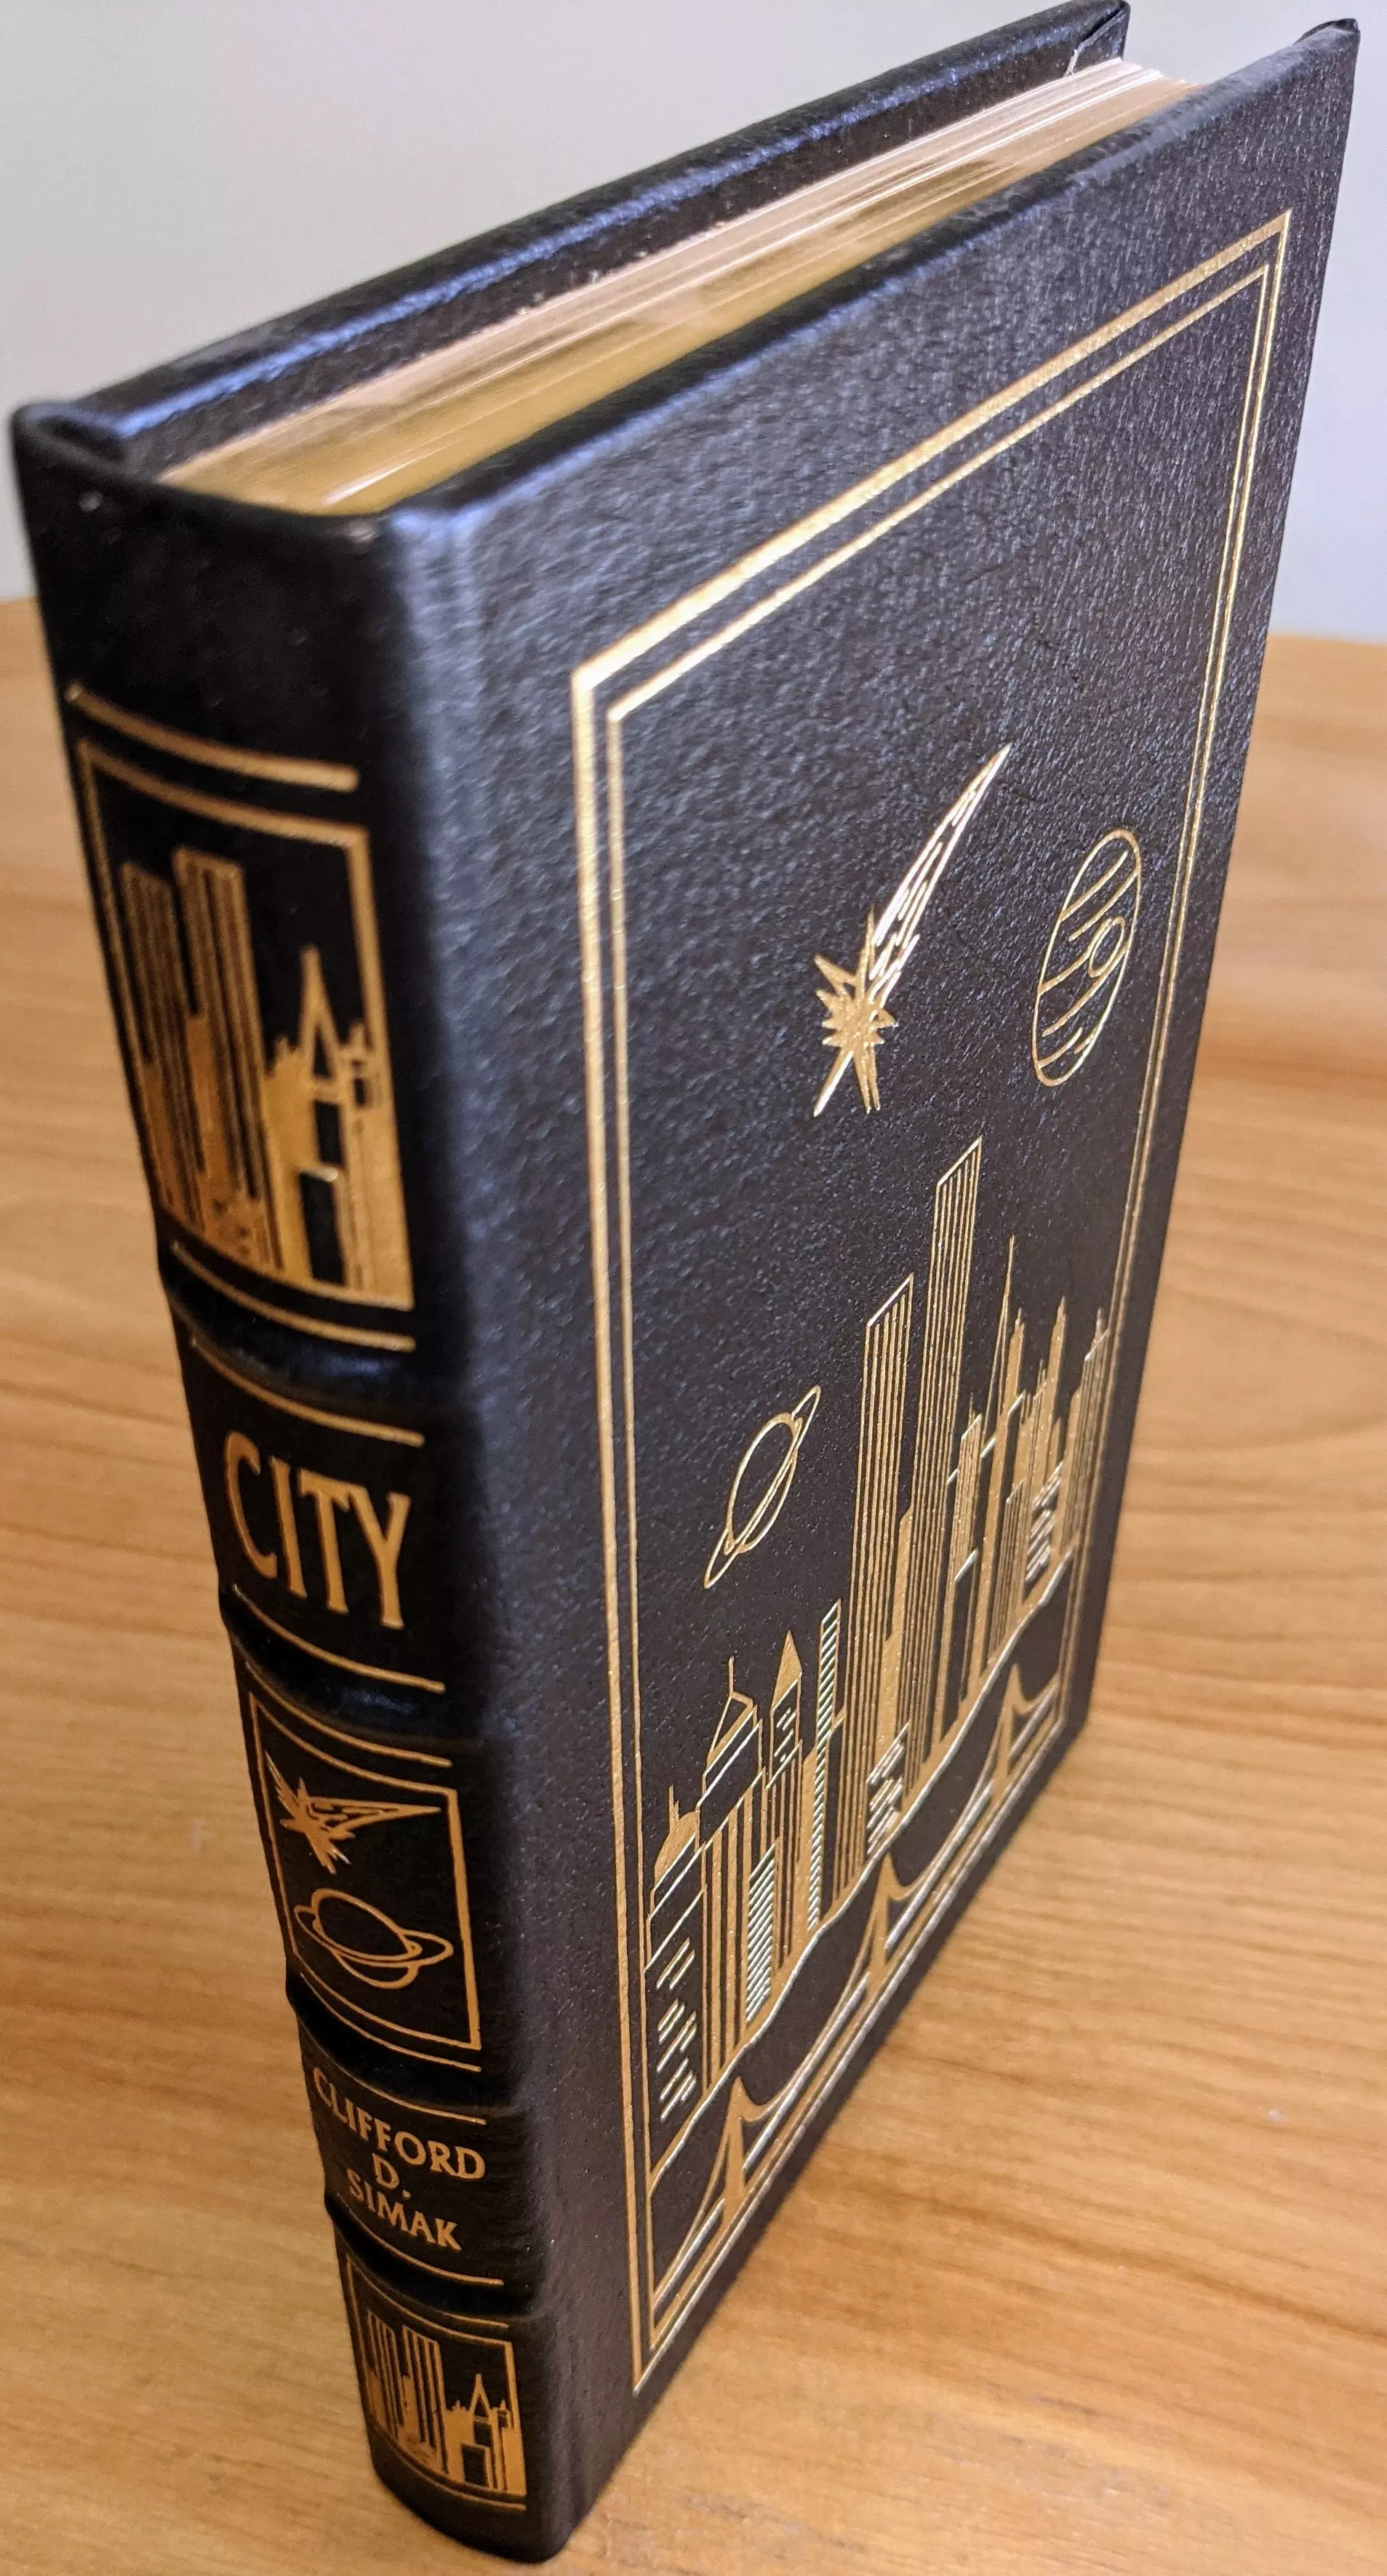 Stunning Black Leather Bound hardback book with hubbed spine, cover artwork in 22kt gold, printed on archival paper with gold gilded edges, smyth sewing & concealed muslin joints
	  - original artwork by Pat Morrissey